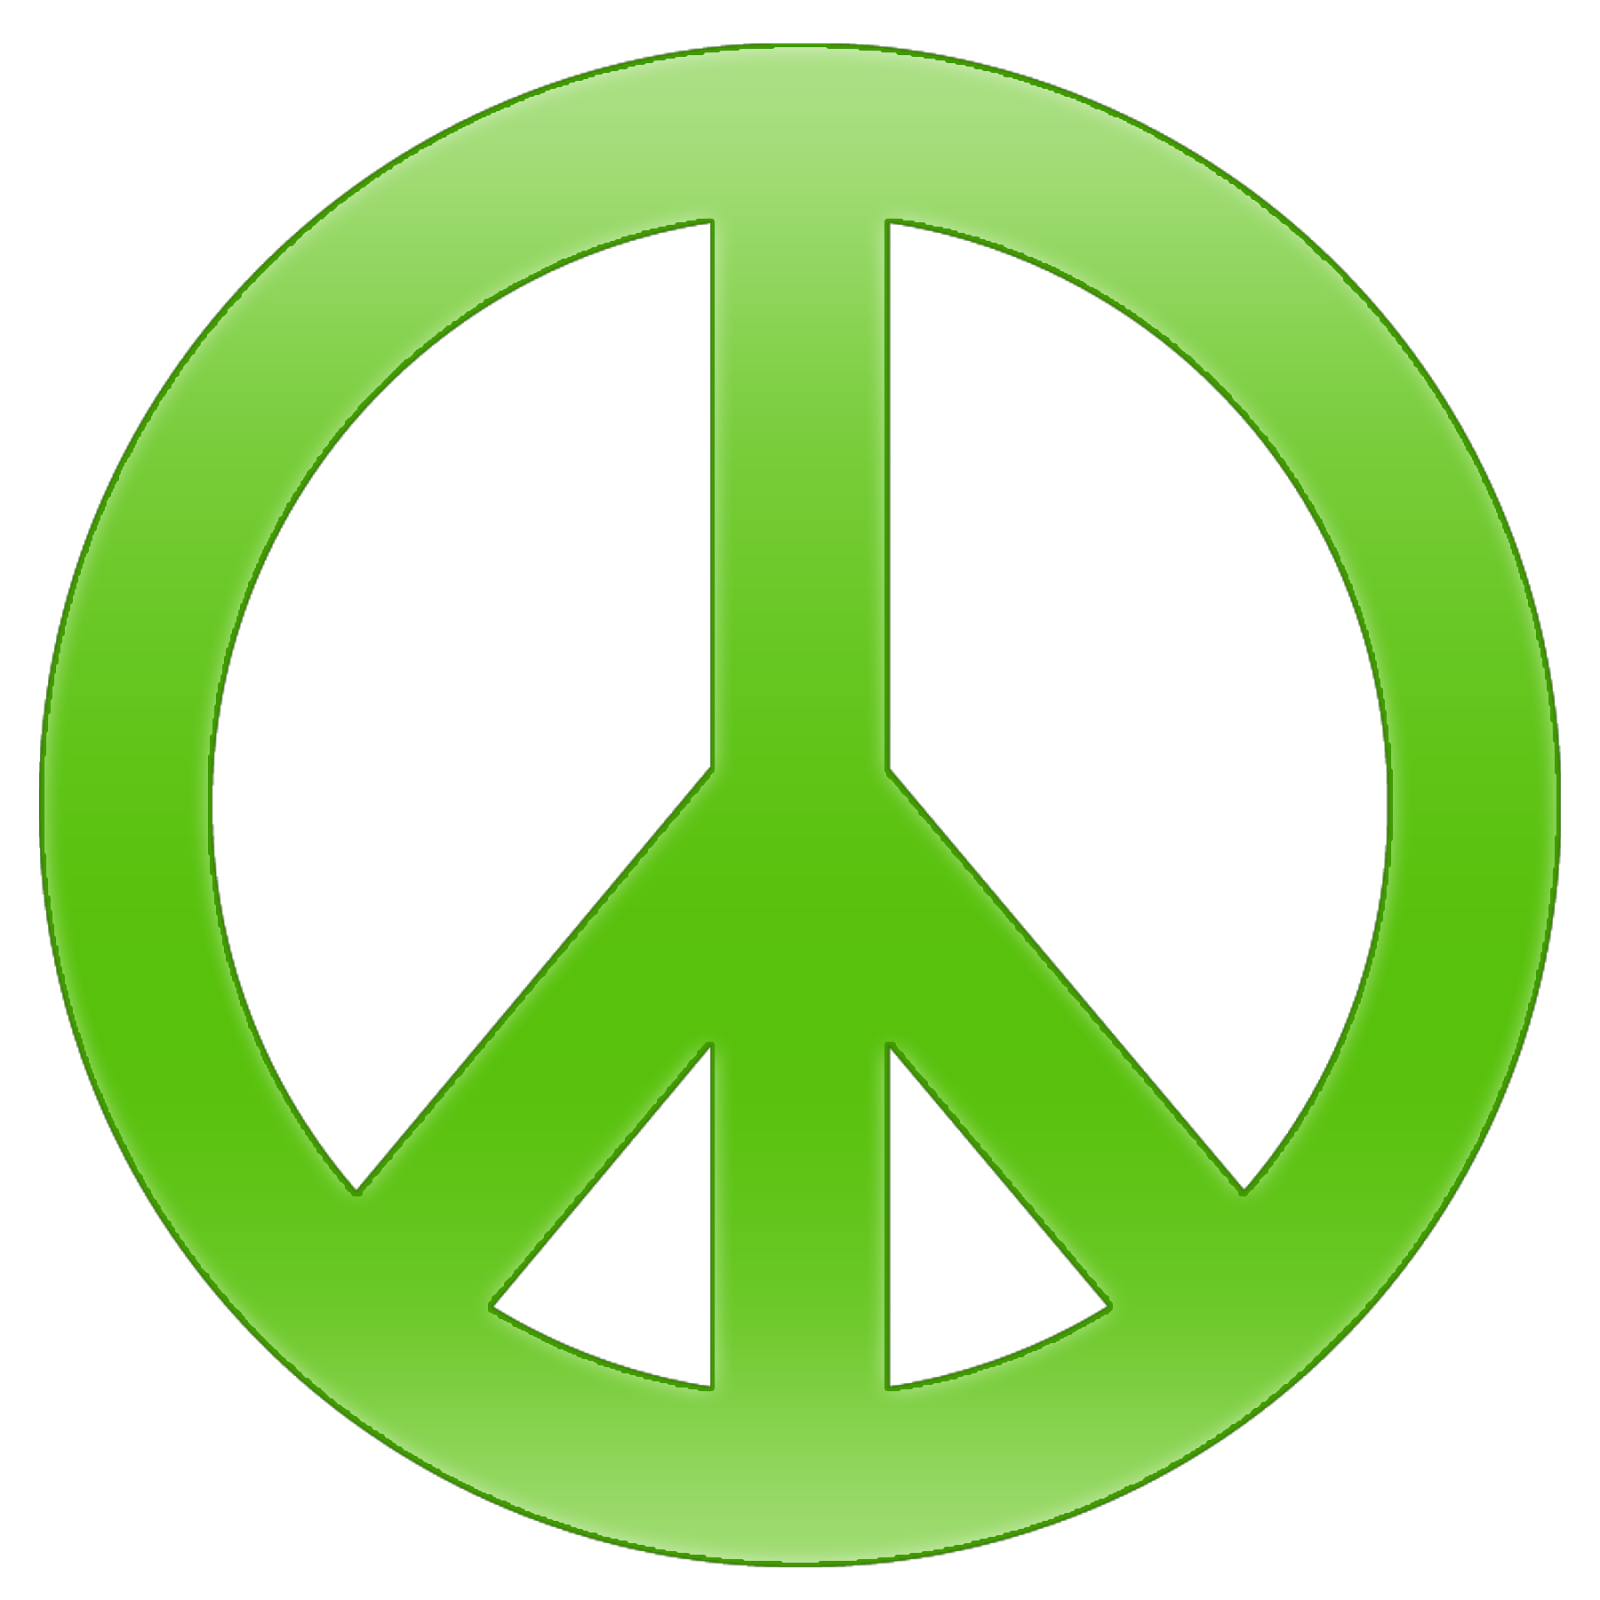 Peace Sign Templates - ClipArt Best